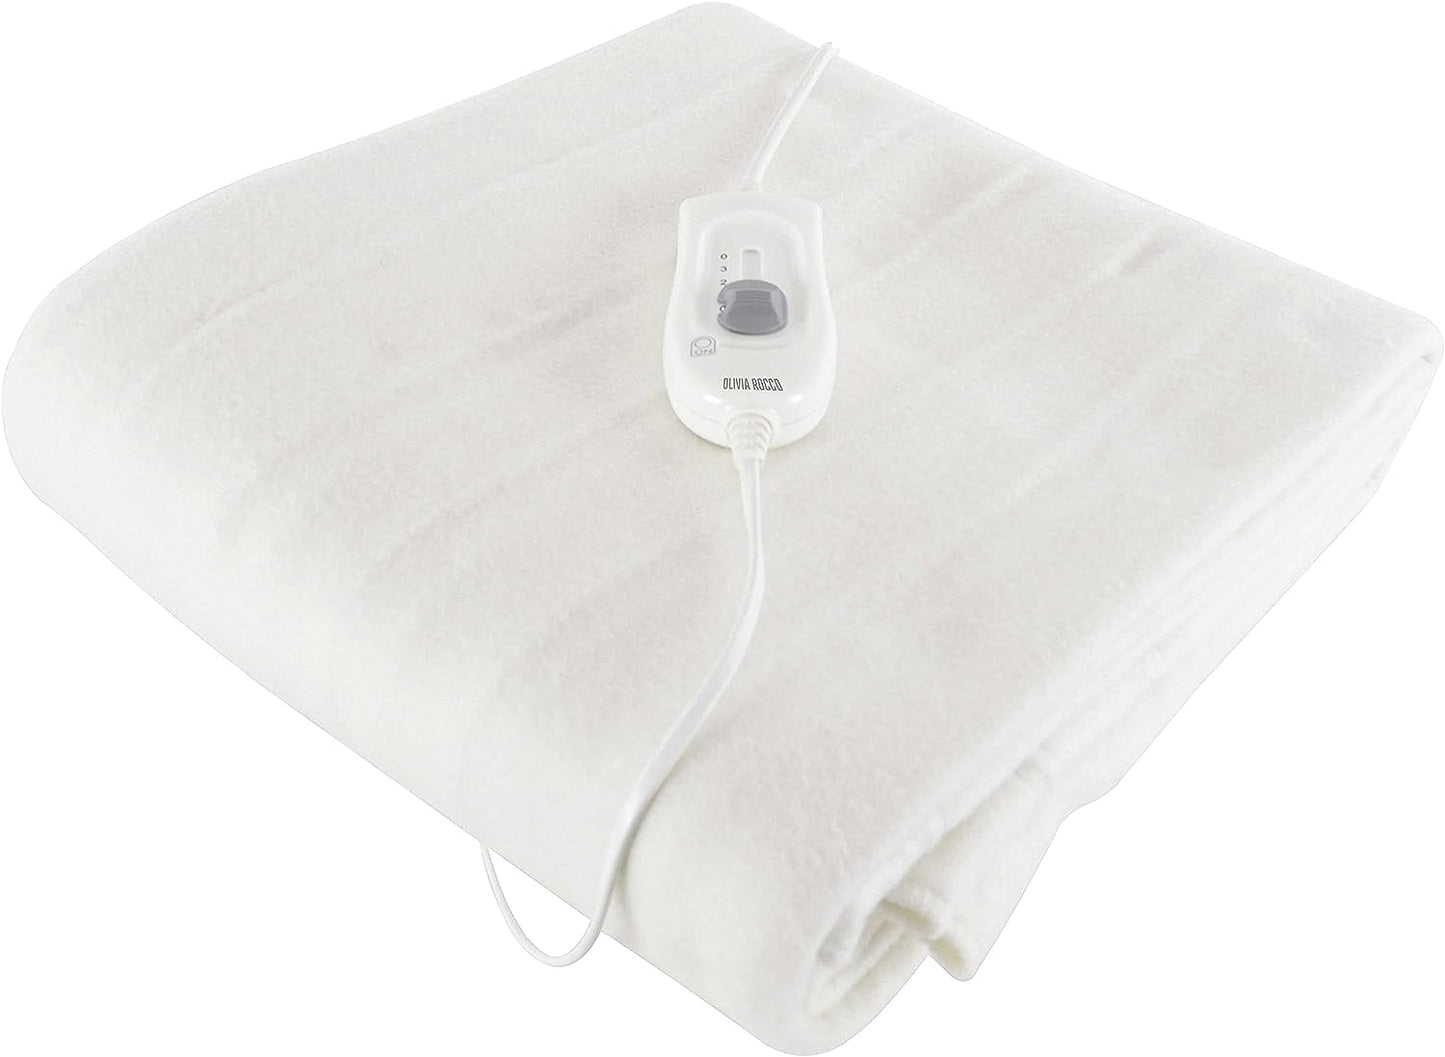 Electric Heated Under-Blanket, White